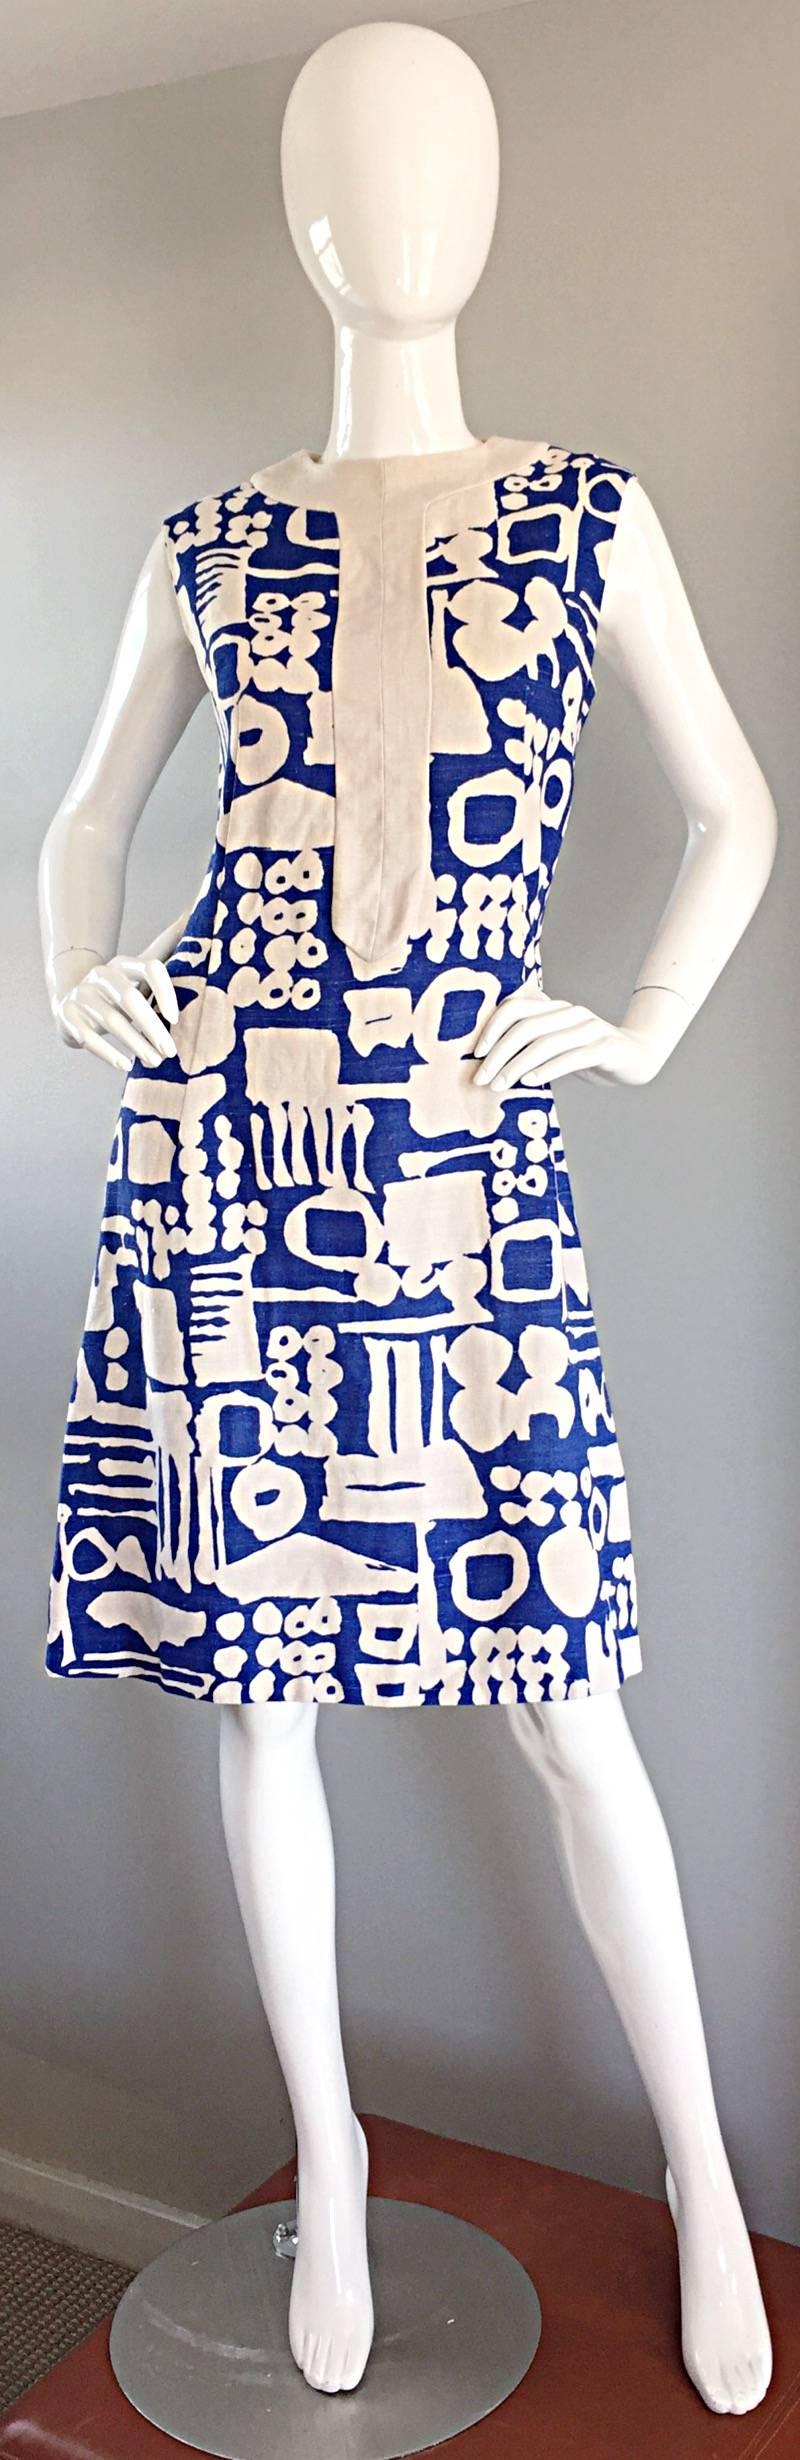 Extraordinary rare ARTHUR'S ORIGINAL cerulean blue, and natural ivory linen vintage shift dress! This hard to find 1960s dress features an amazing 'tribal' print throughout, with a mod strip down the center bodice, with matching collar. Such a great